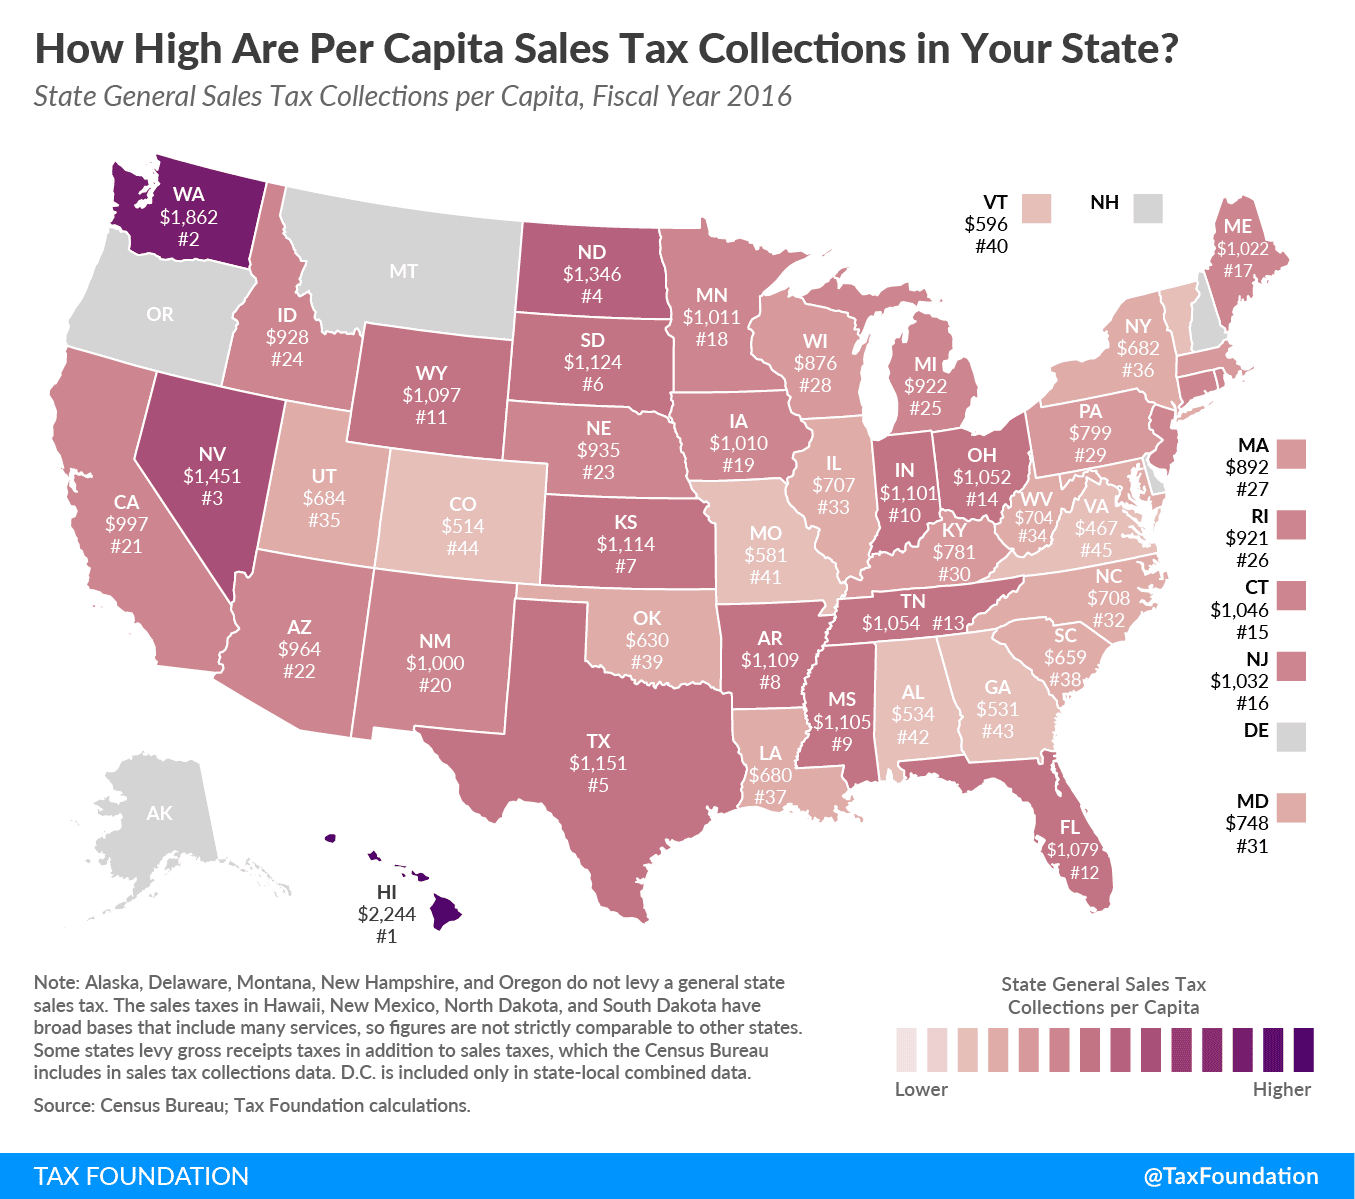 Sales Taxes Per Capita: How Much Does Your State Collect?